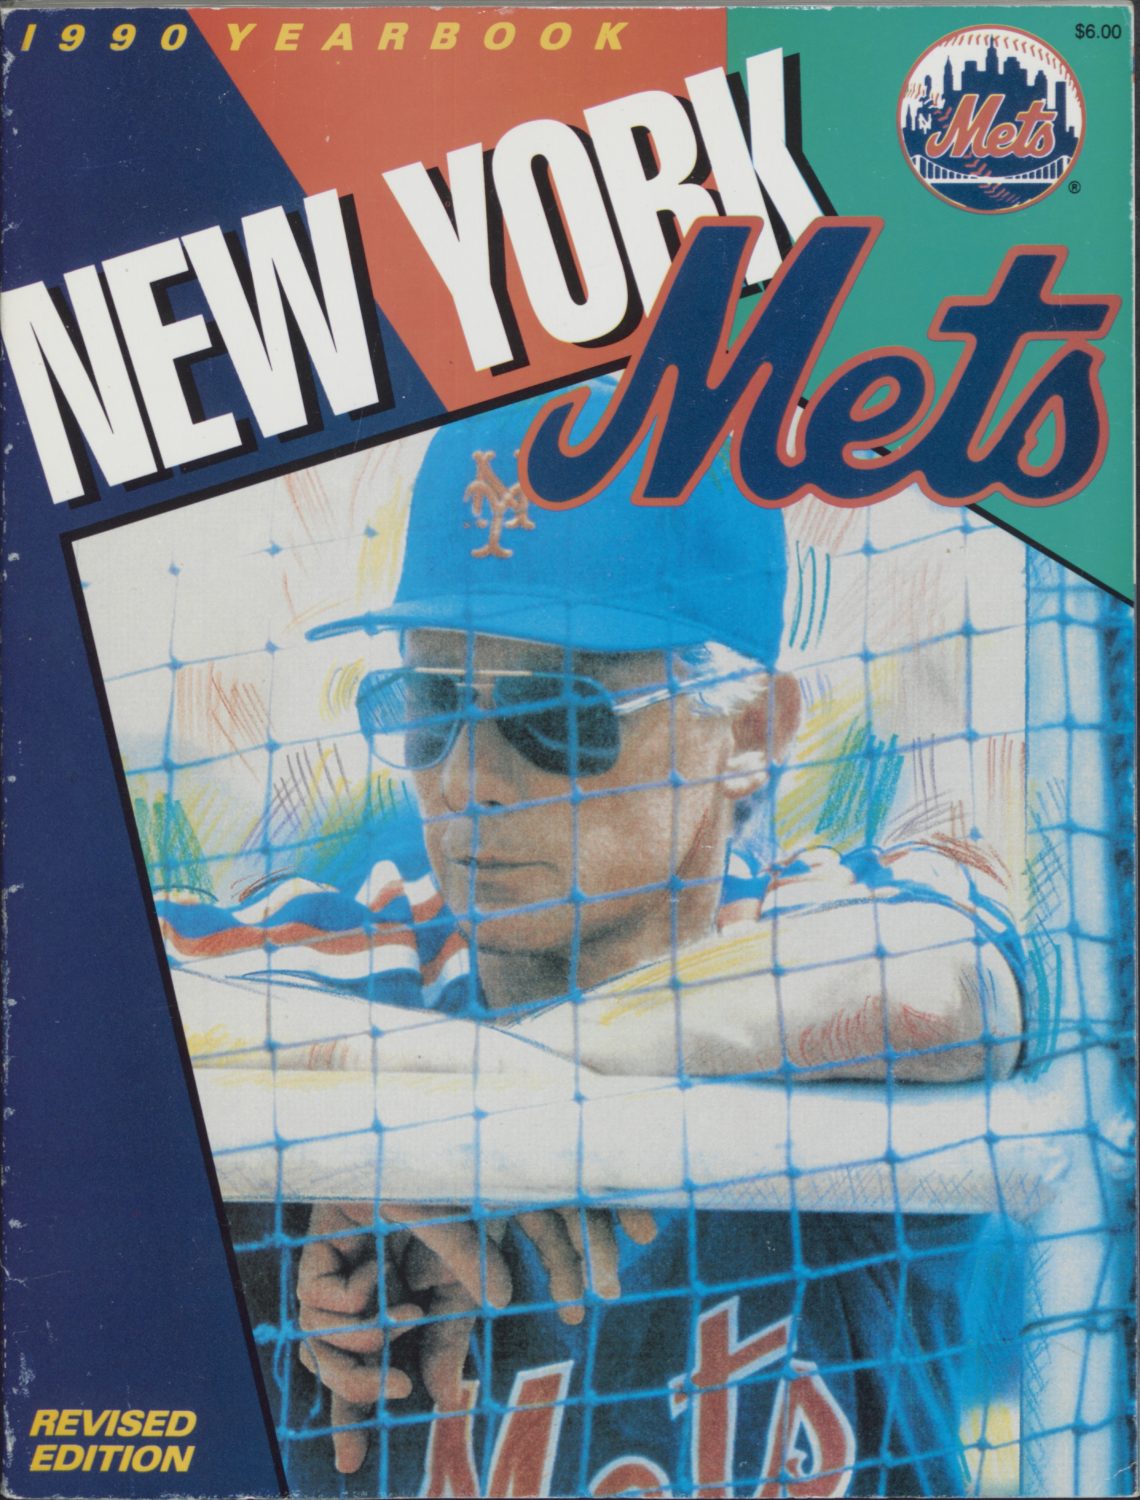 1990 Mets Yearbook Cover with Bud Harrelson